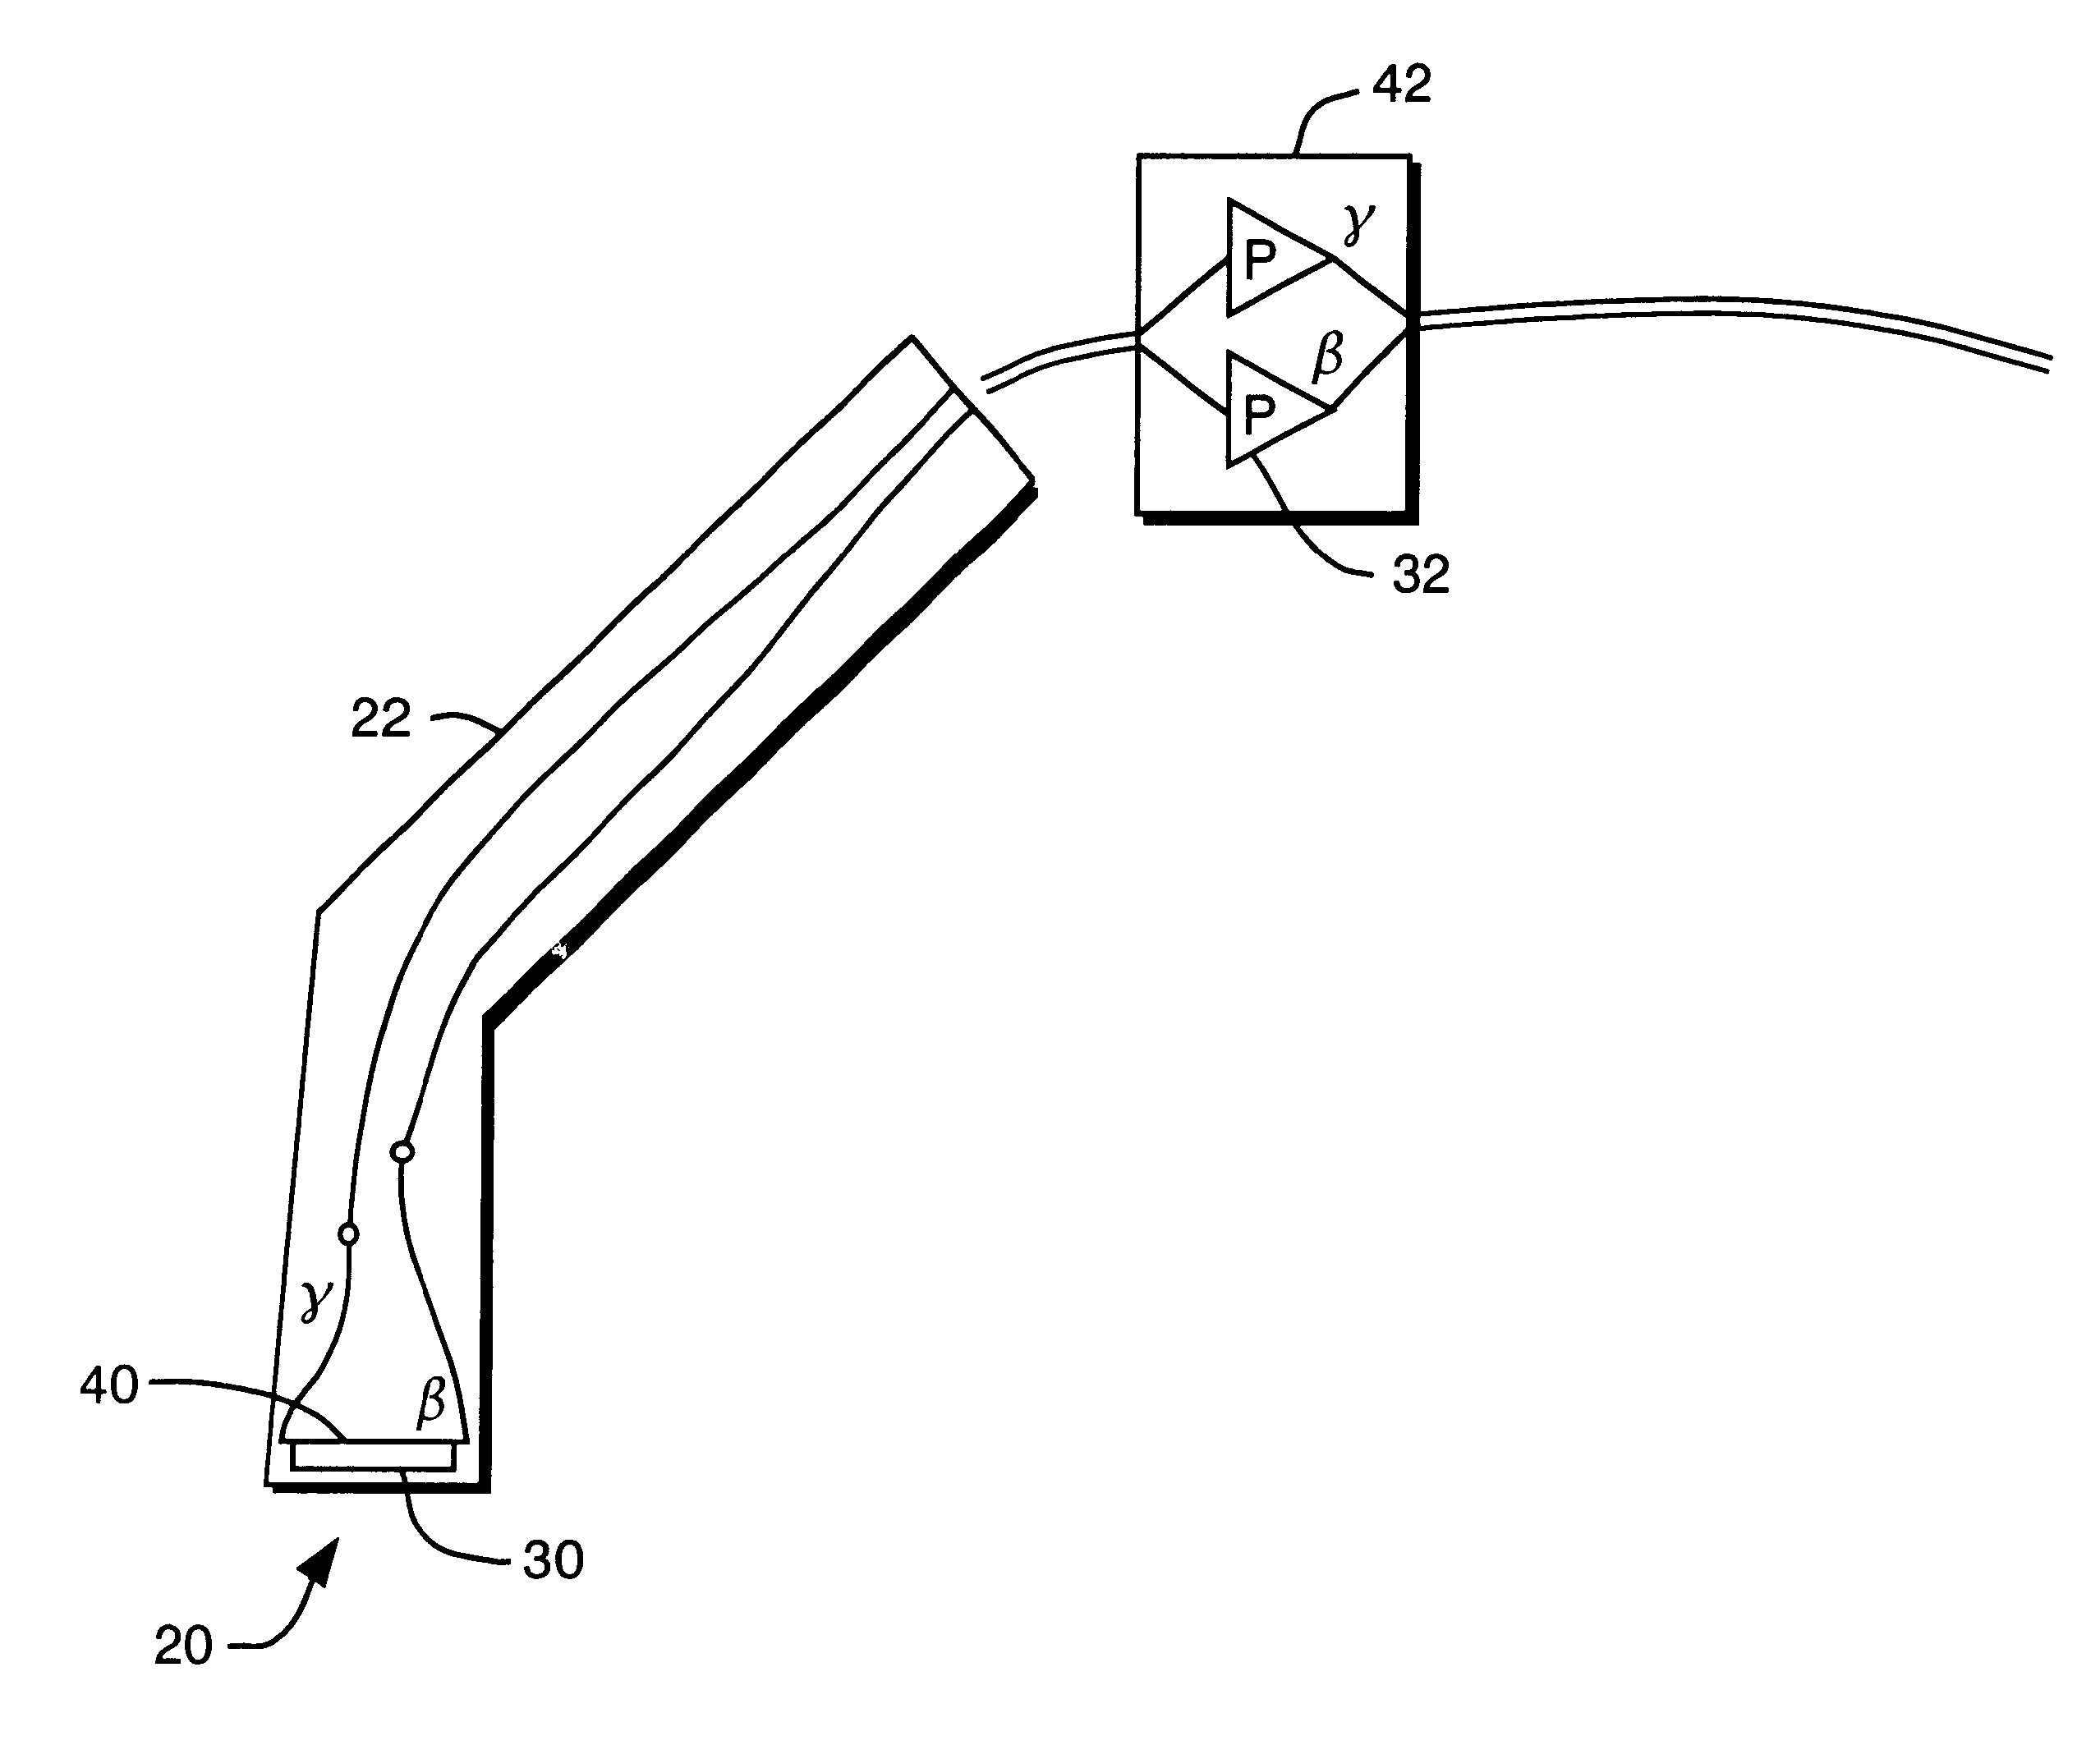 Solid state beta-sensitive surgical probe